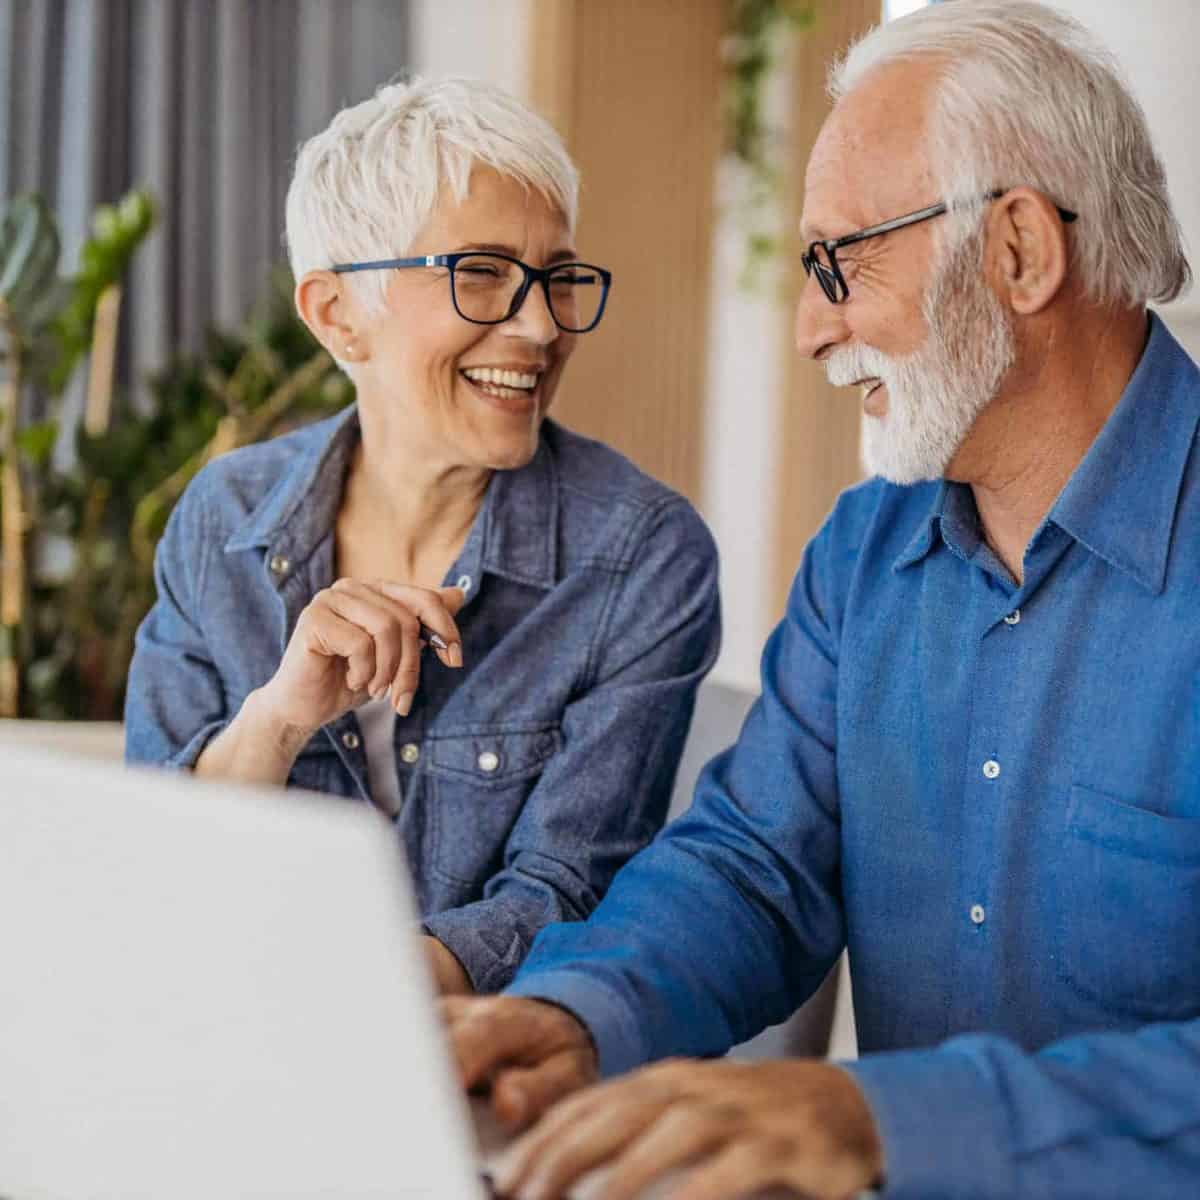 Florida Precious Metals IRA & Investing Company Copy of Senior couple at laptop smiling GettyImages 1323096524 1200x1200 1